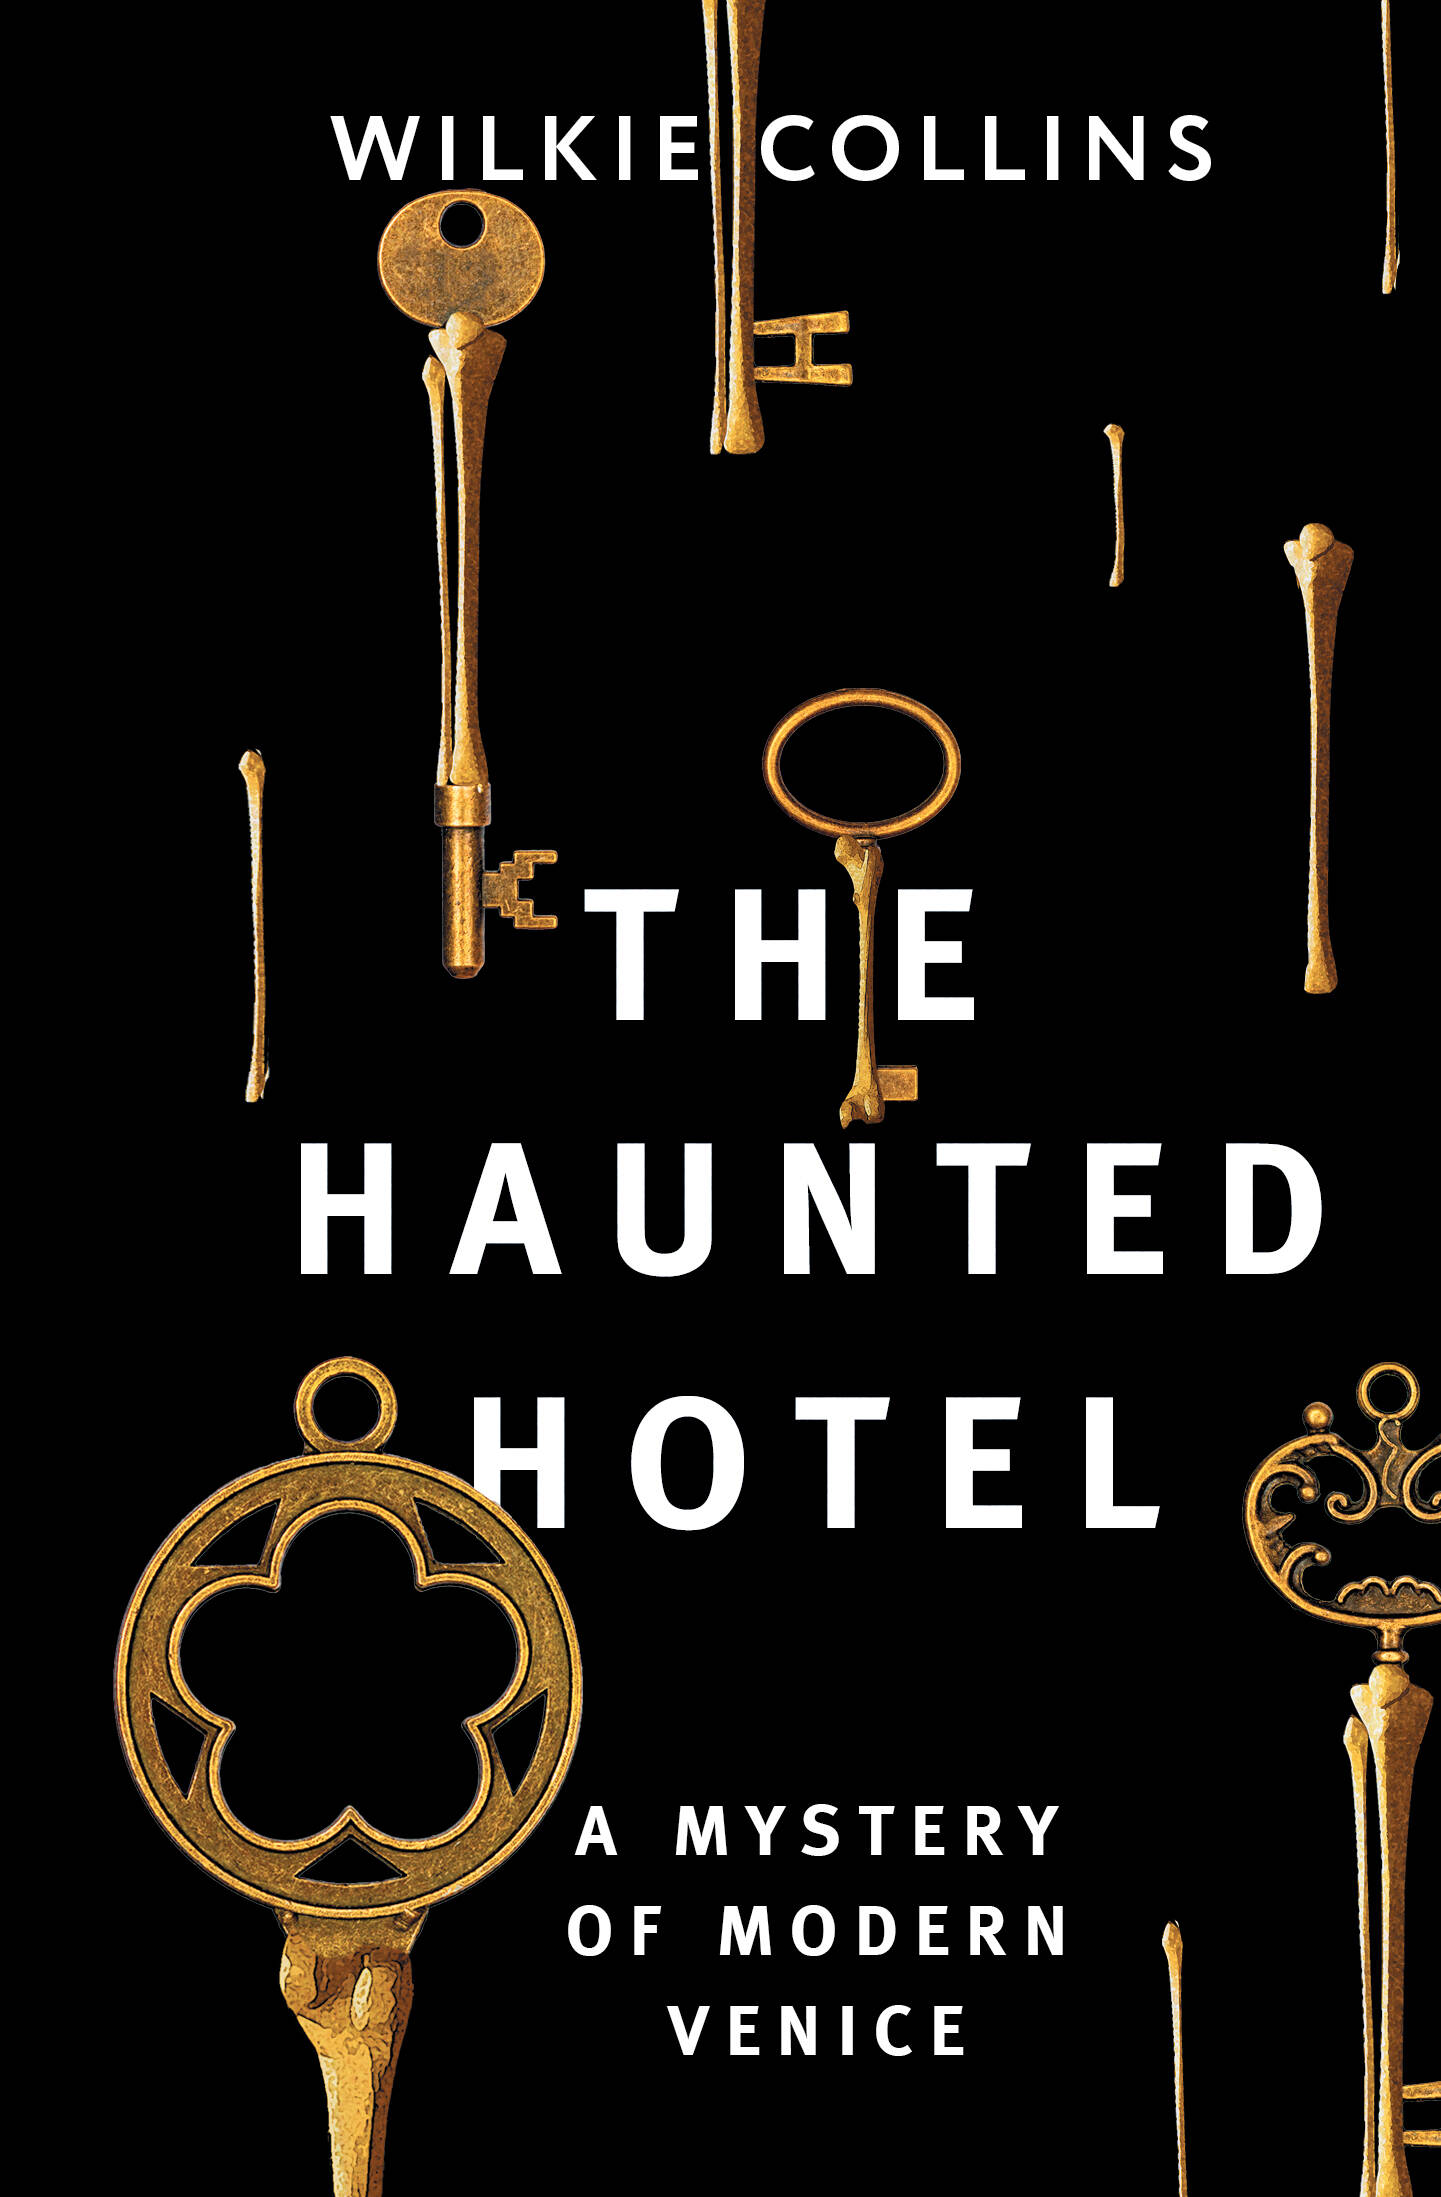 collins wilkie the haunted hotel Collins Wilkie The Haunted Hotel: A Mystery of Modern Venice